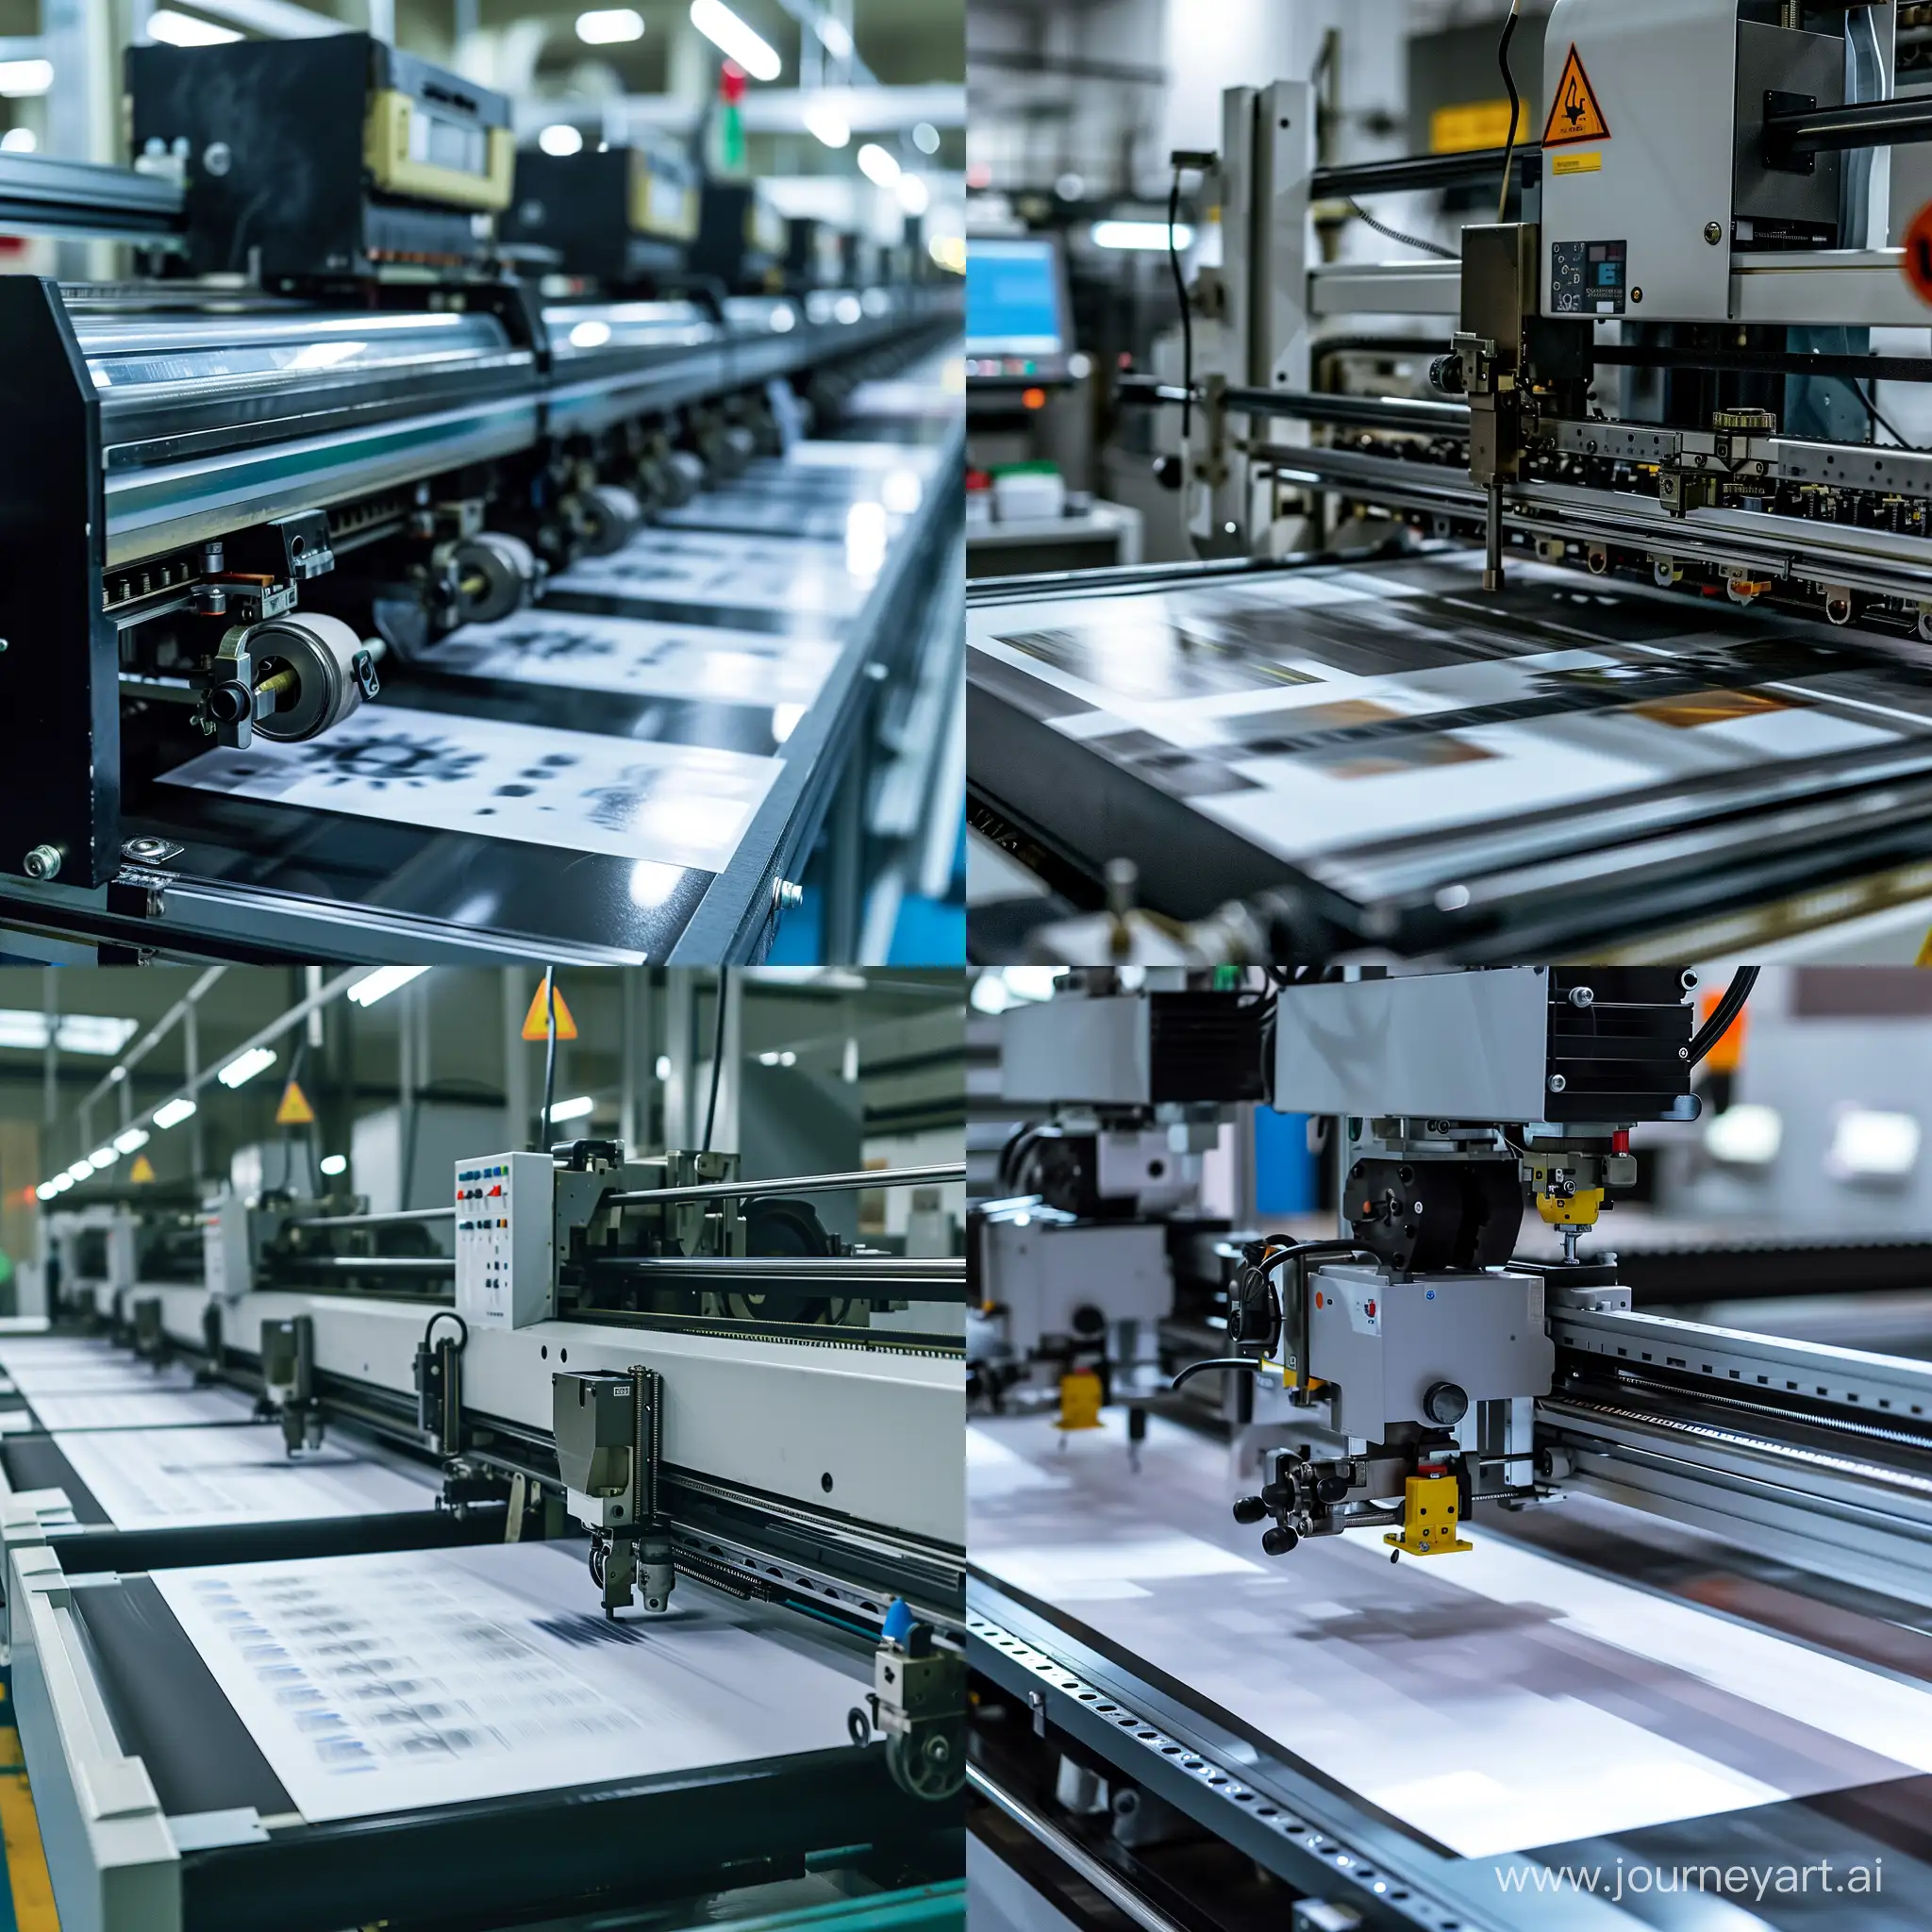 Efficient-Printing-Machine-in-Full-Production